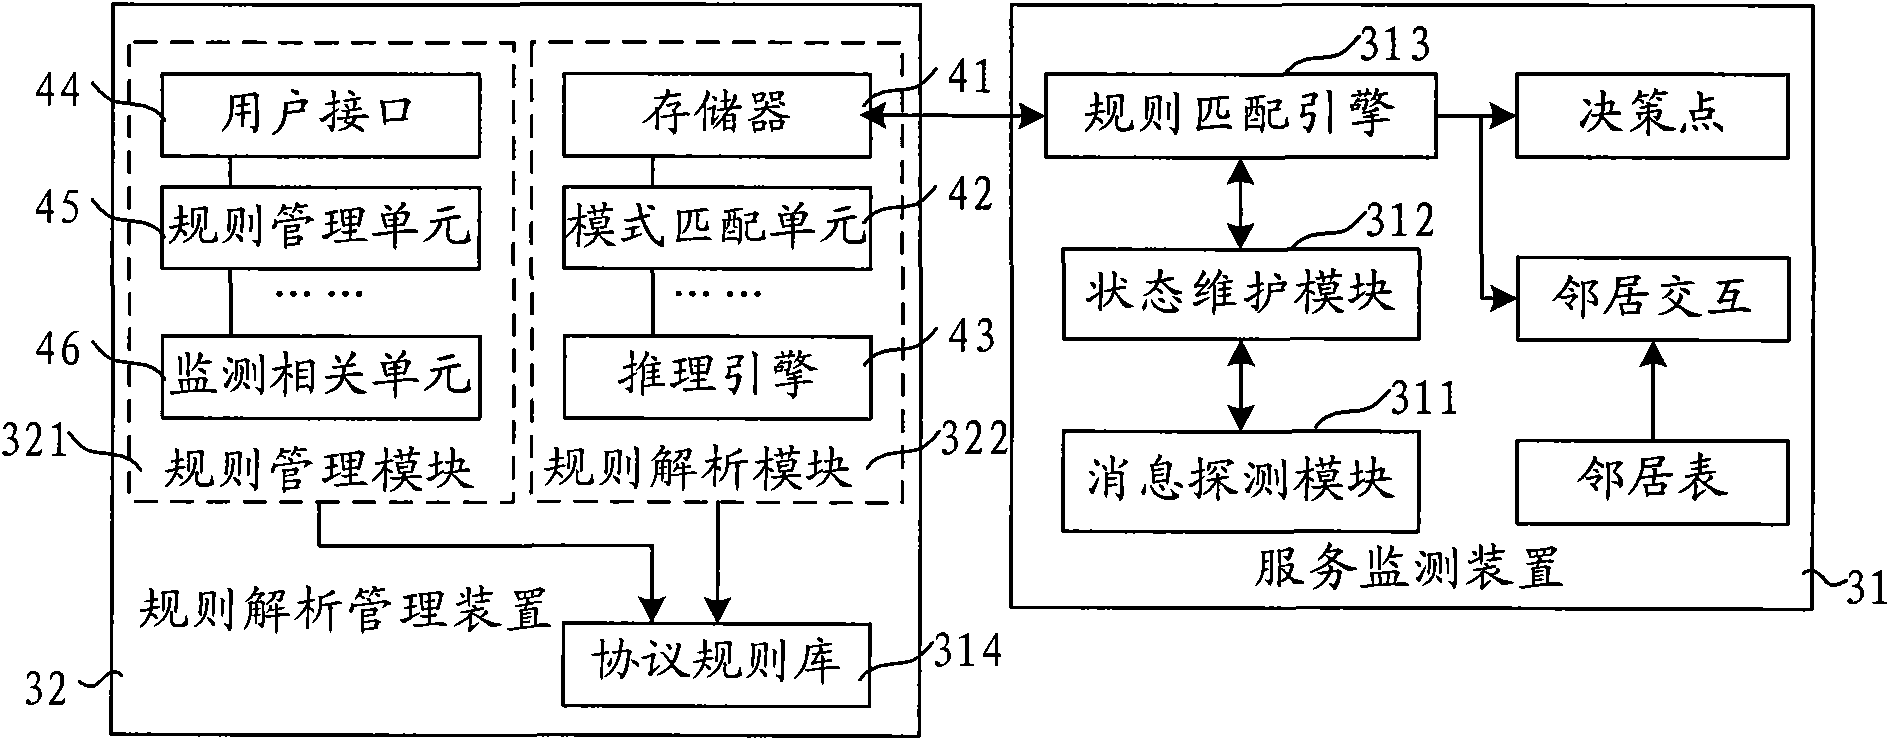 Protocol-based service combination system and method